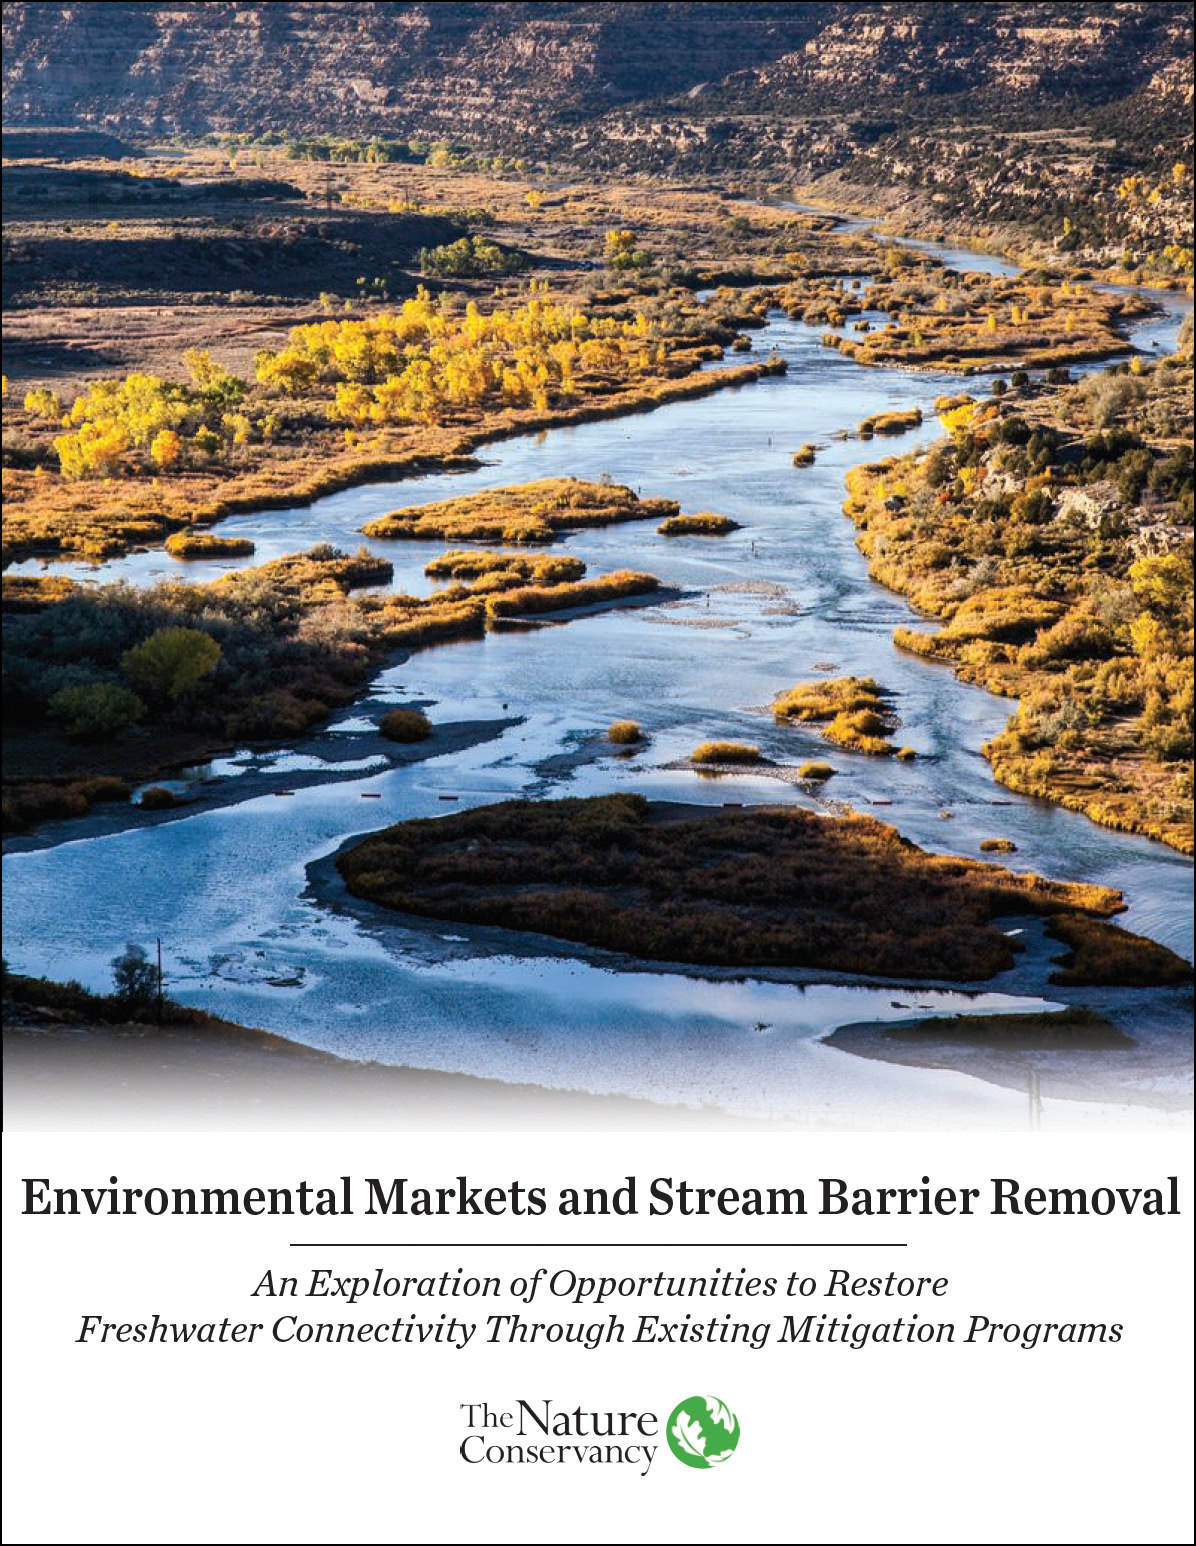 Environmental Markets and Stream Barrier Removal Report - An exploration of opportunities to restore freshwater connectivity through existing mitigation programs